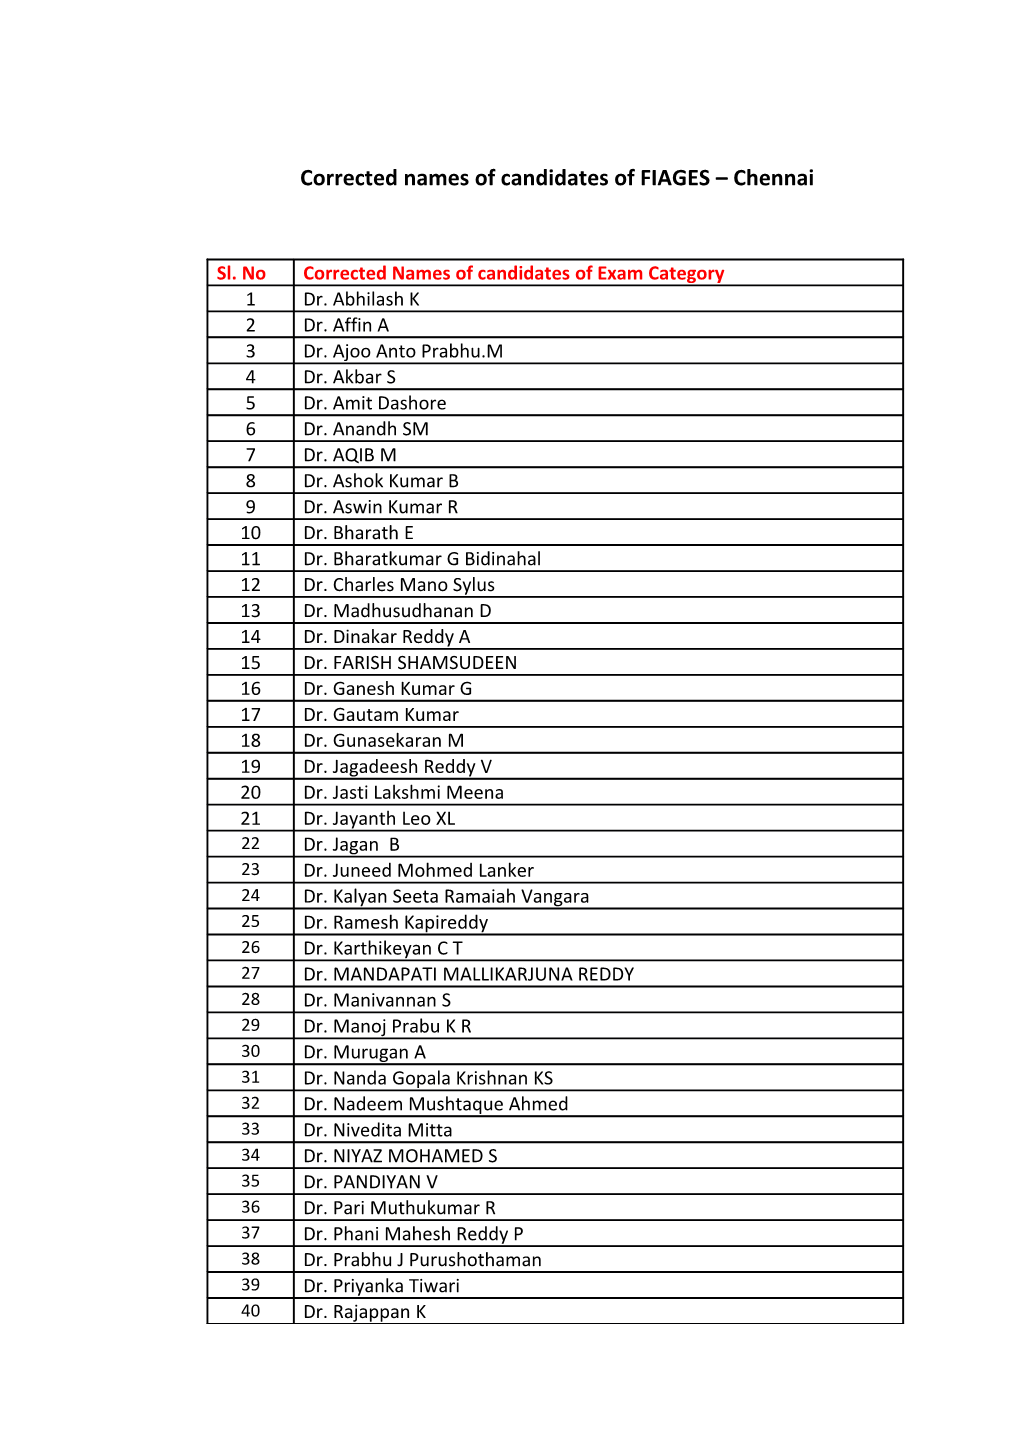 Corrected Names of Candidates of FIAGES Chennai